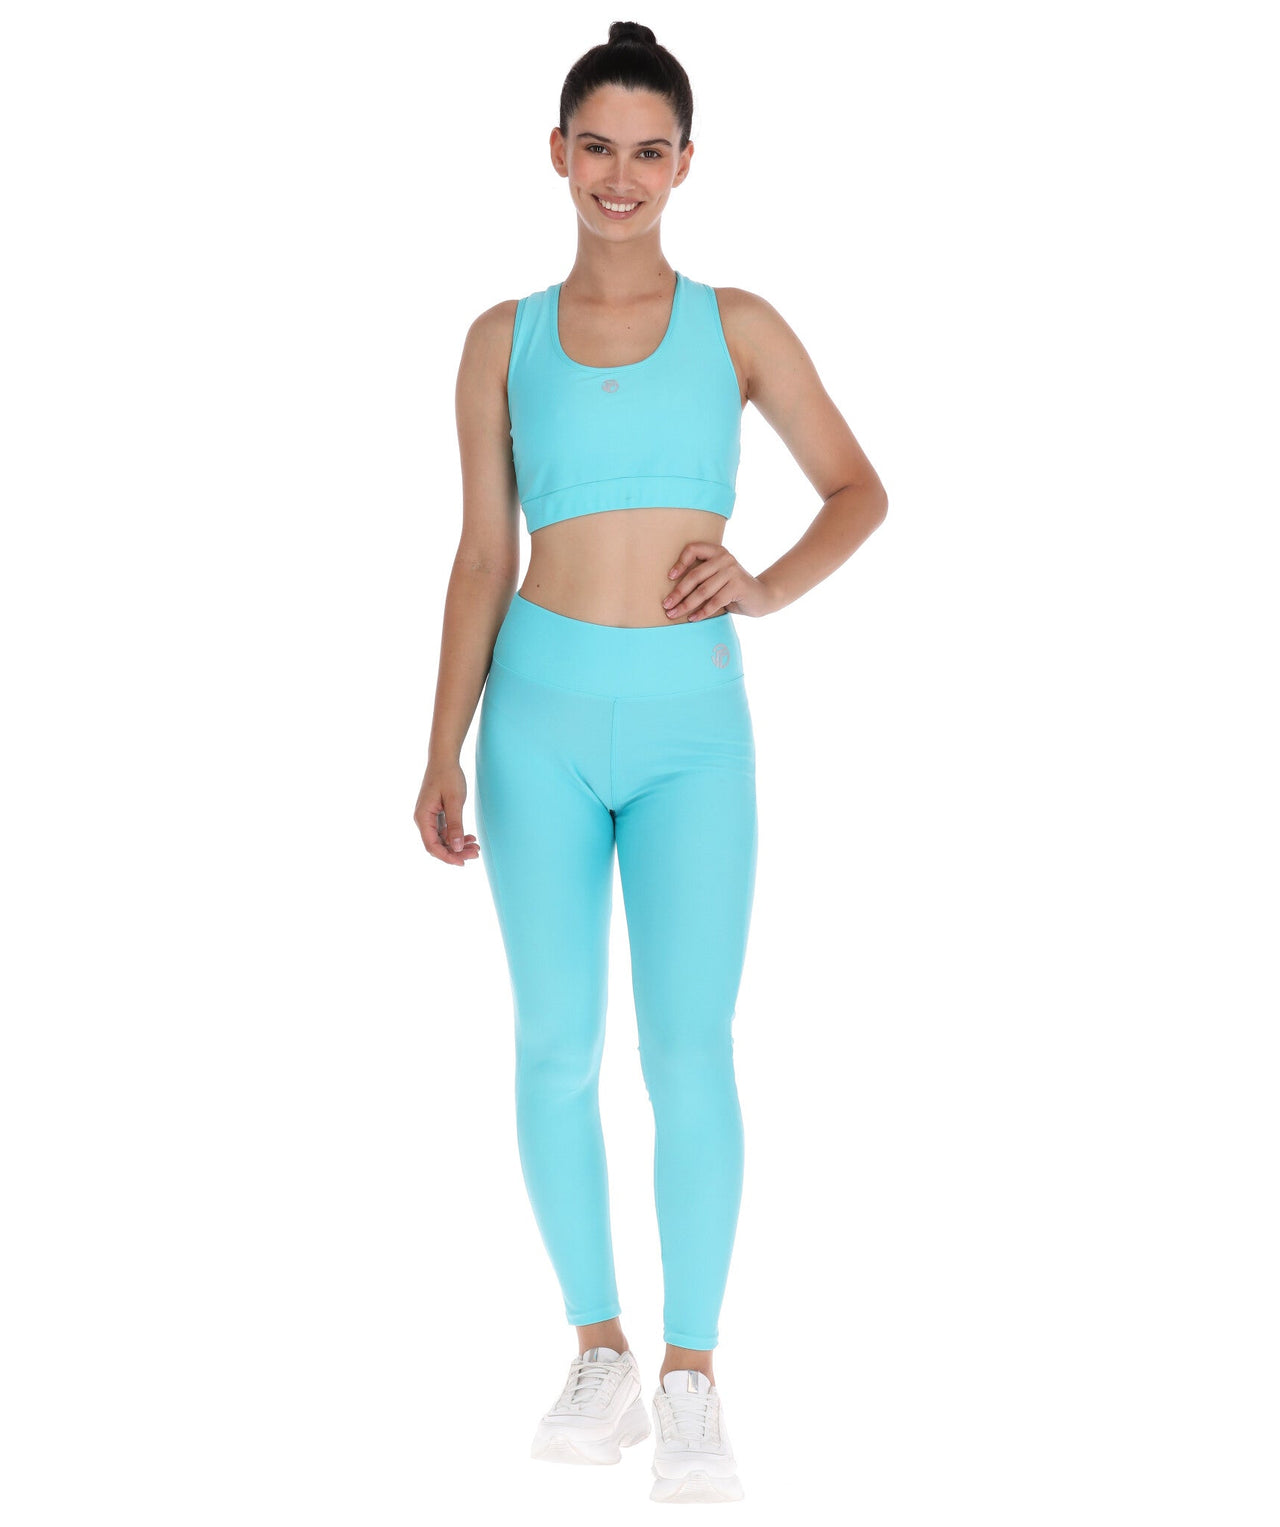 Top Deportivo Mujer Azul Cielo Liso - TFIT - TFIT